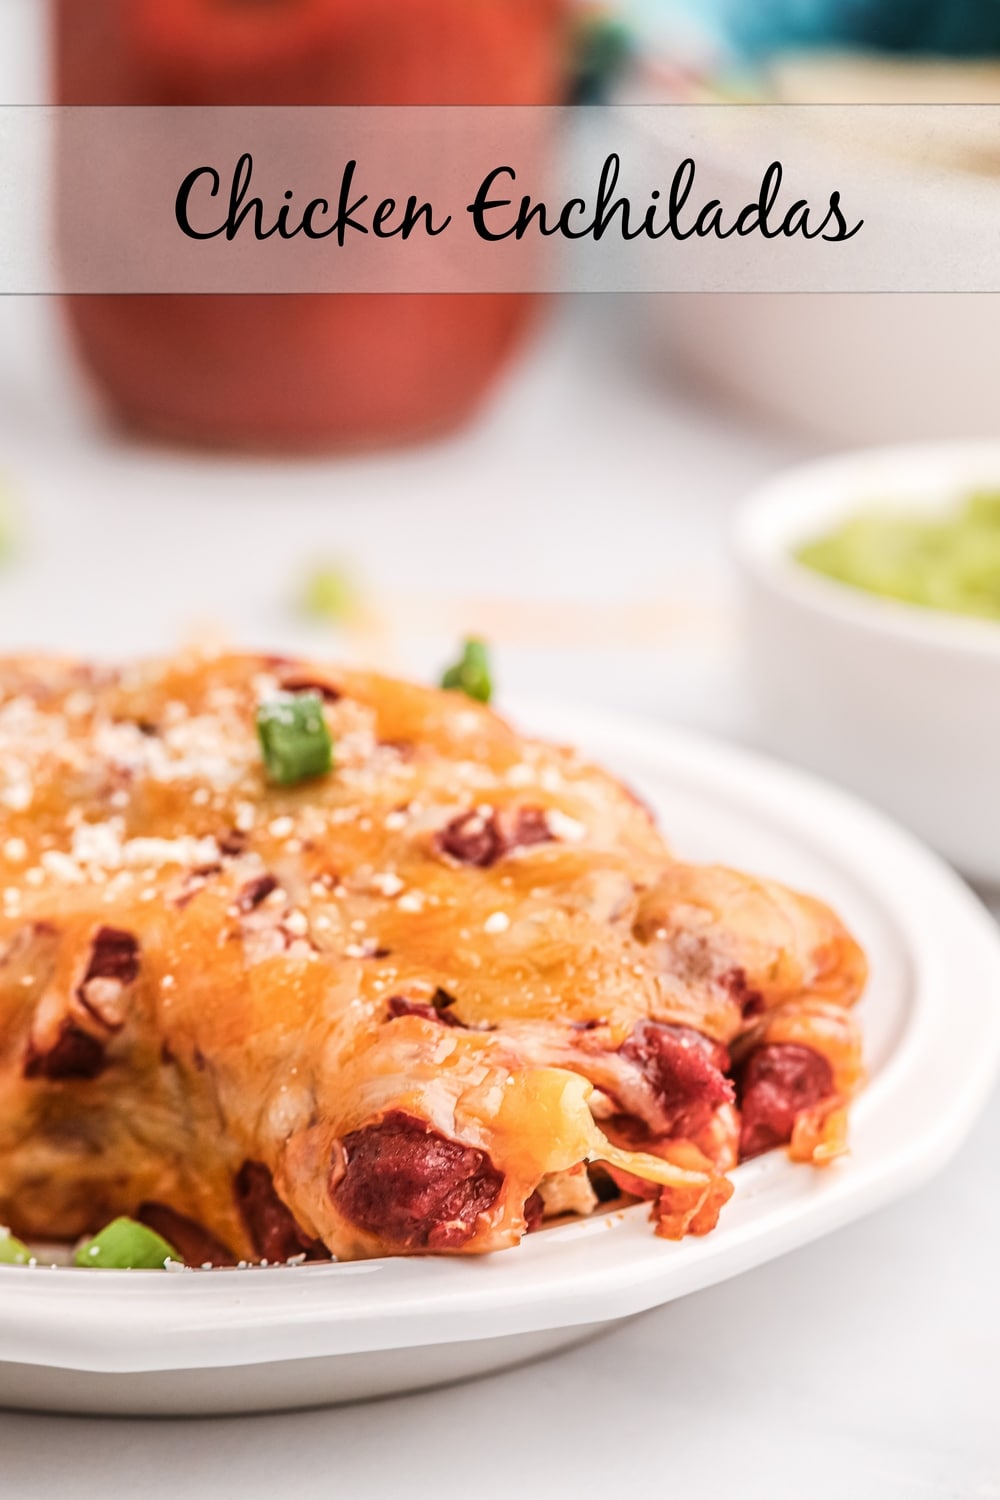 The best Chicken Enchiladas - delicious and easy to put together! These can be made with my favorite homemade enchilada sauce and homemade corn tortillas if you choose.  via @cmpollak1